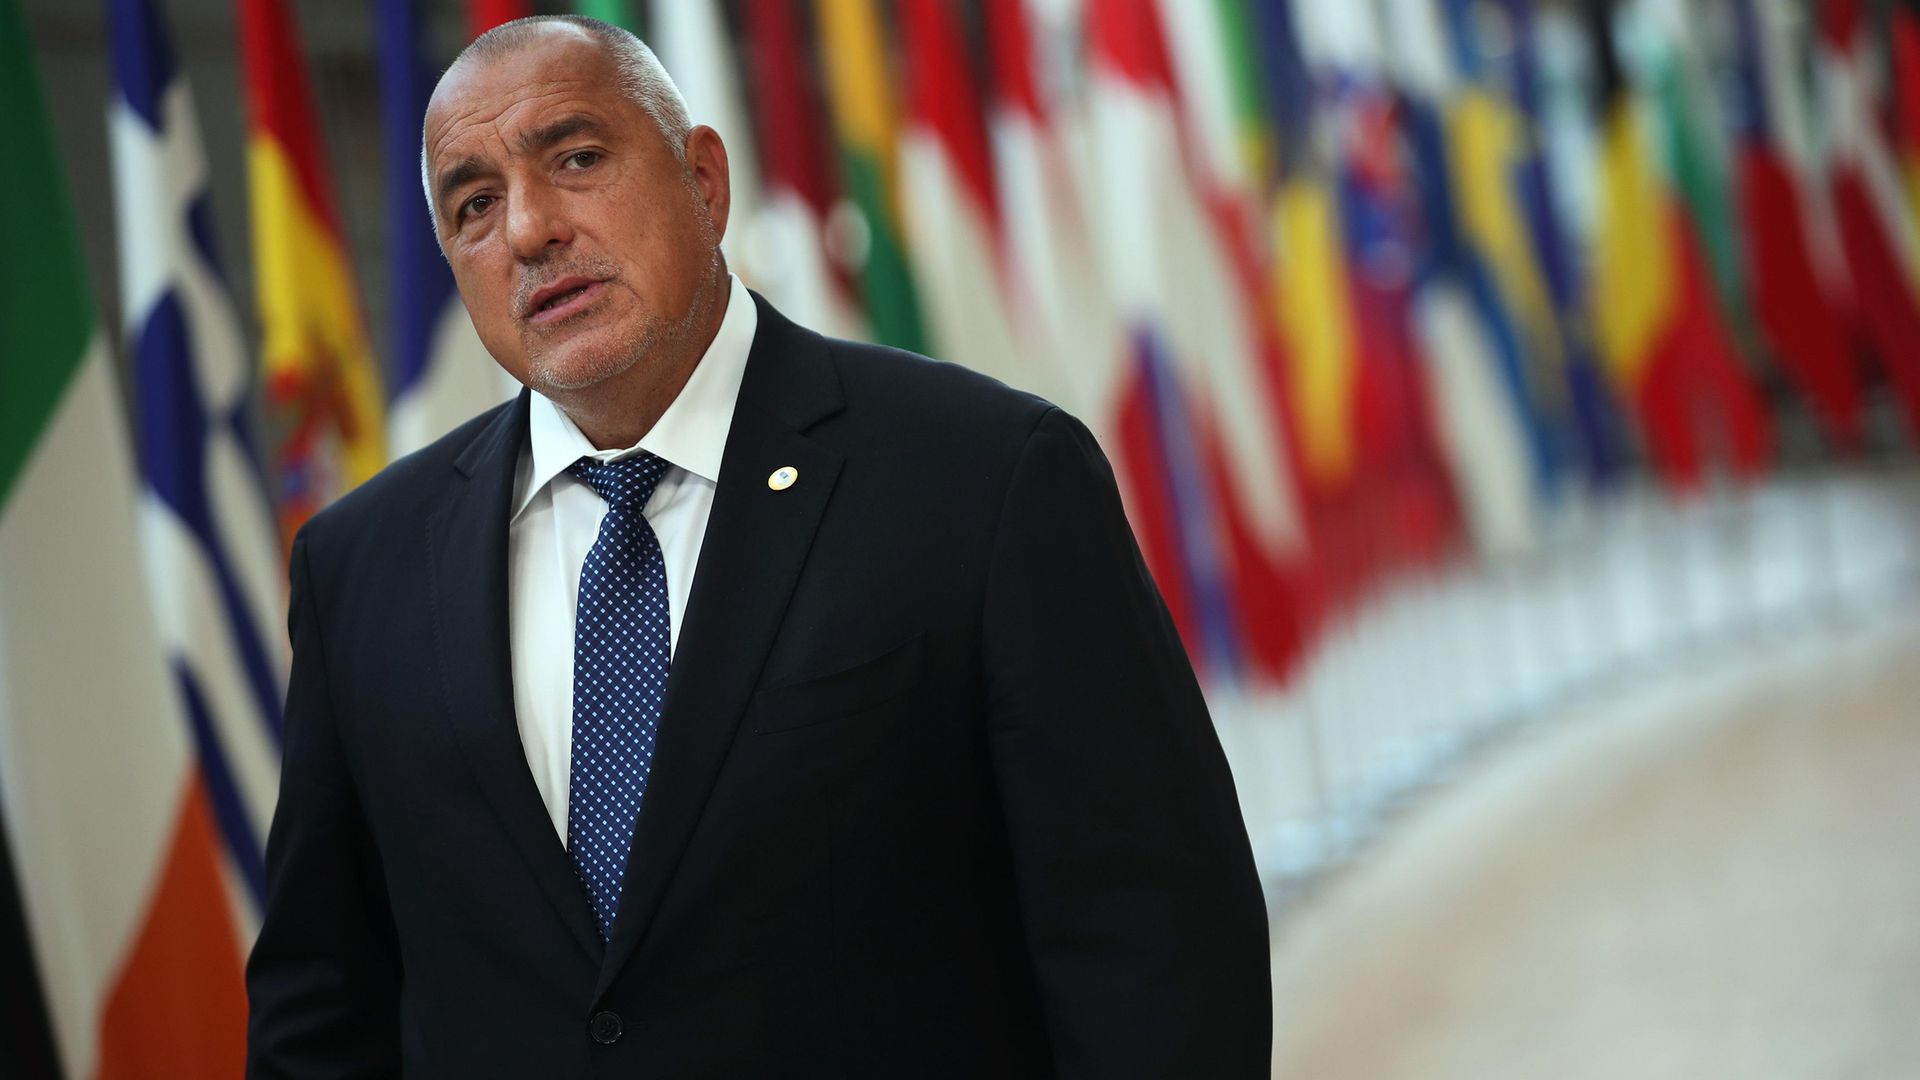 Boyko Borisov at an EU summit in Brussels - Credit: POOL/AFP via Getty Images